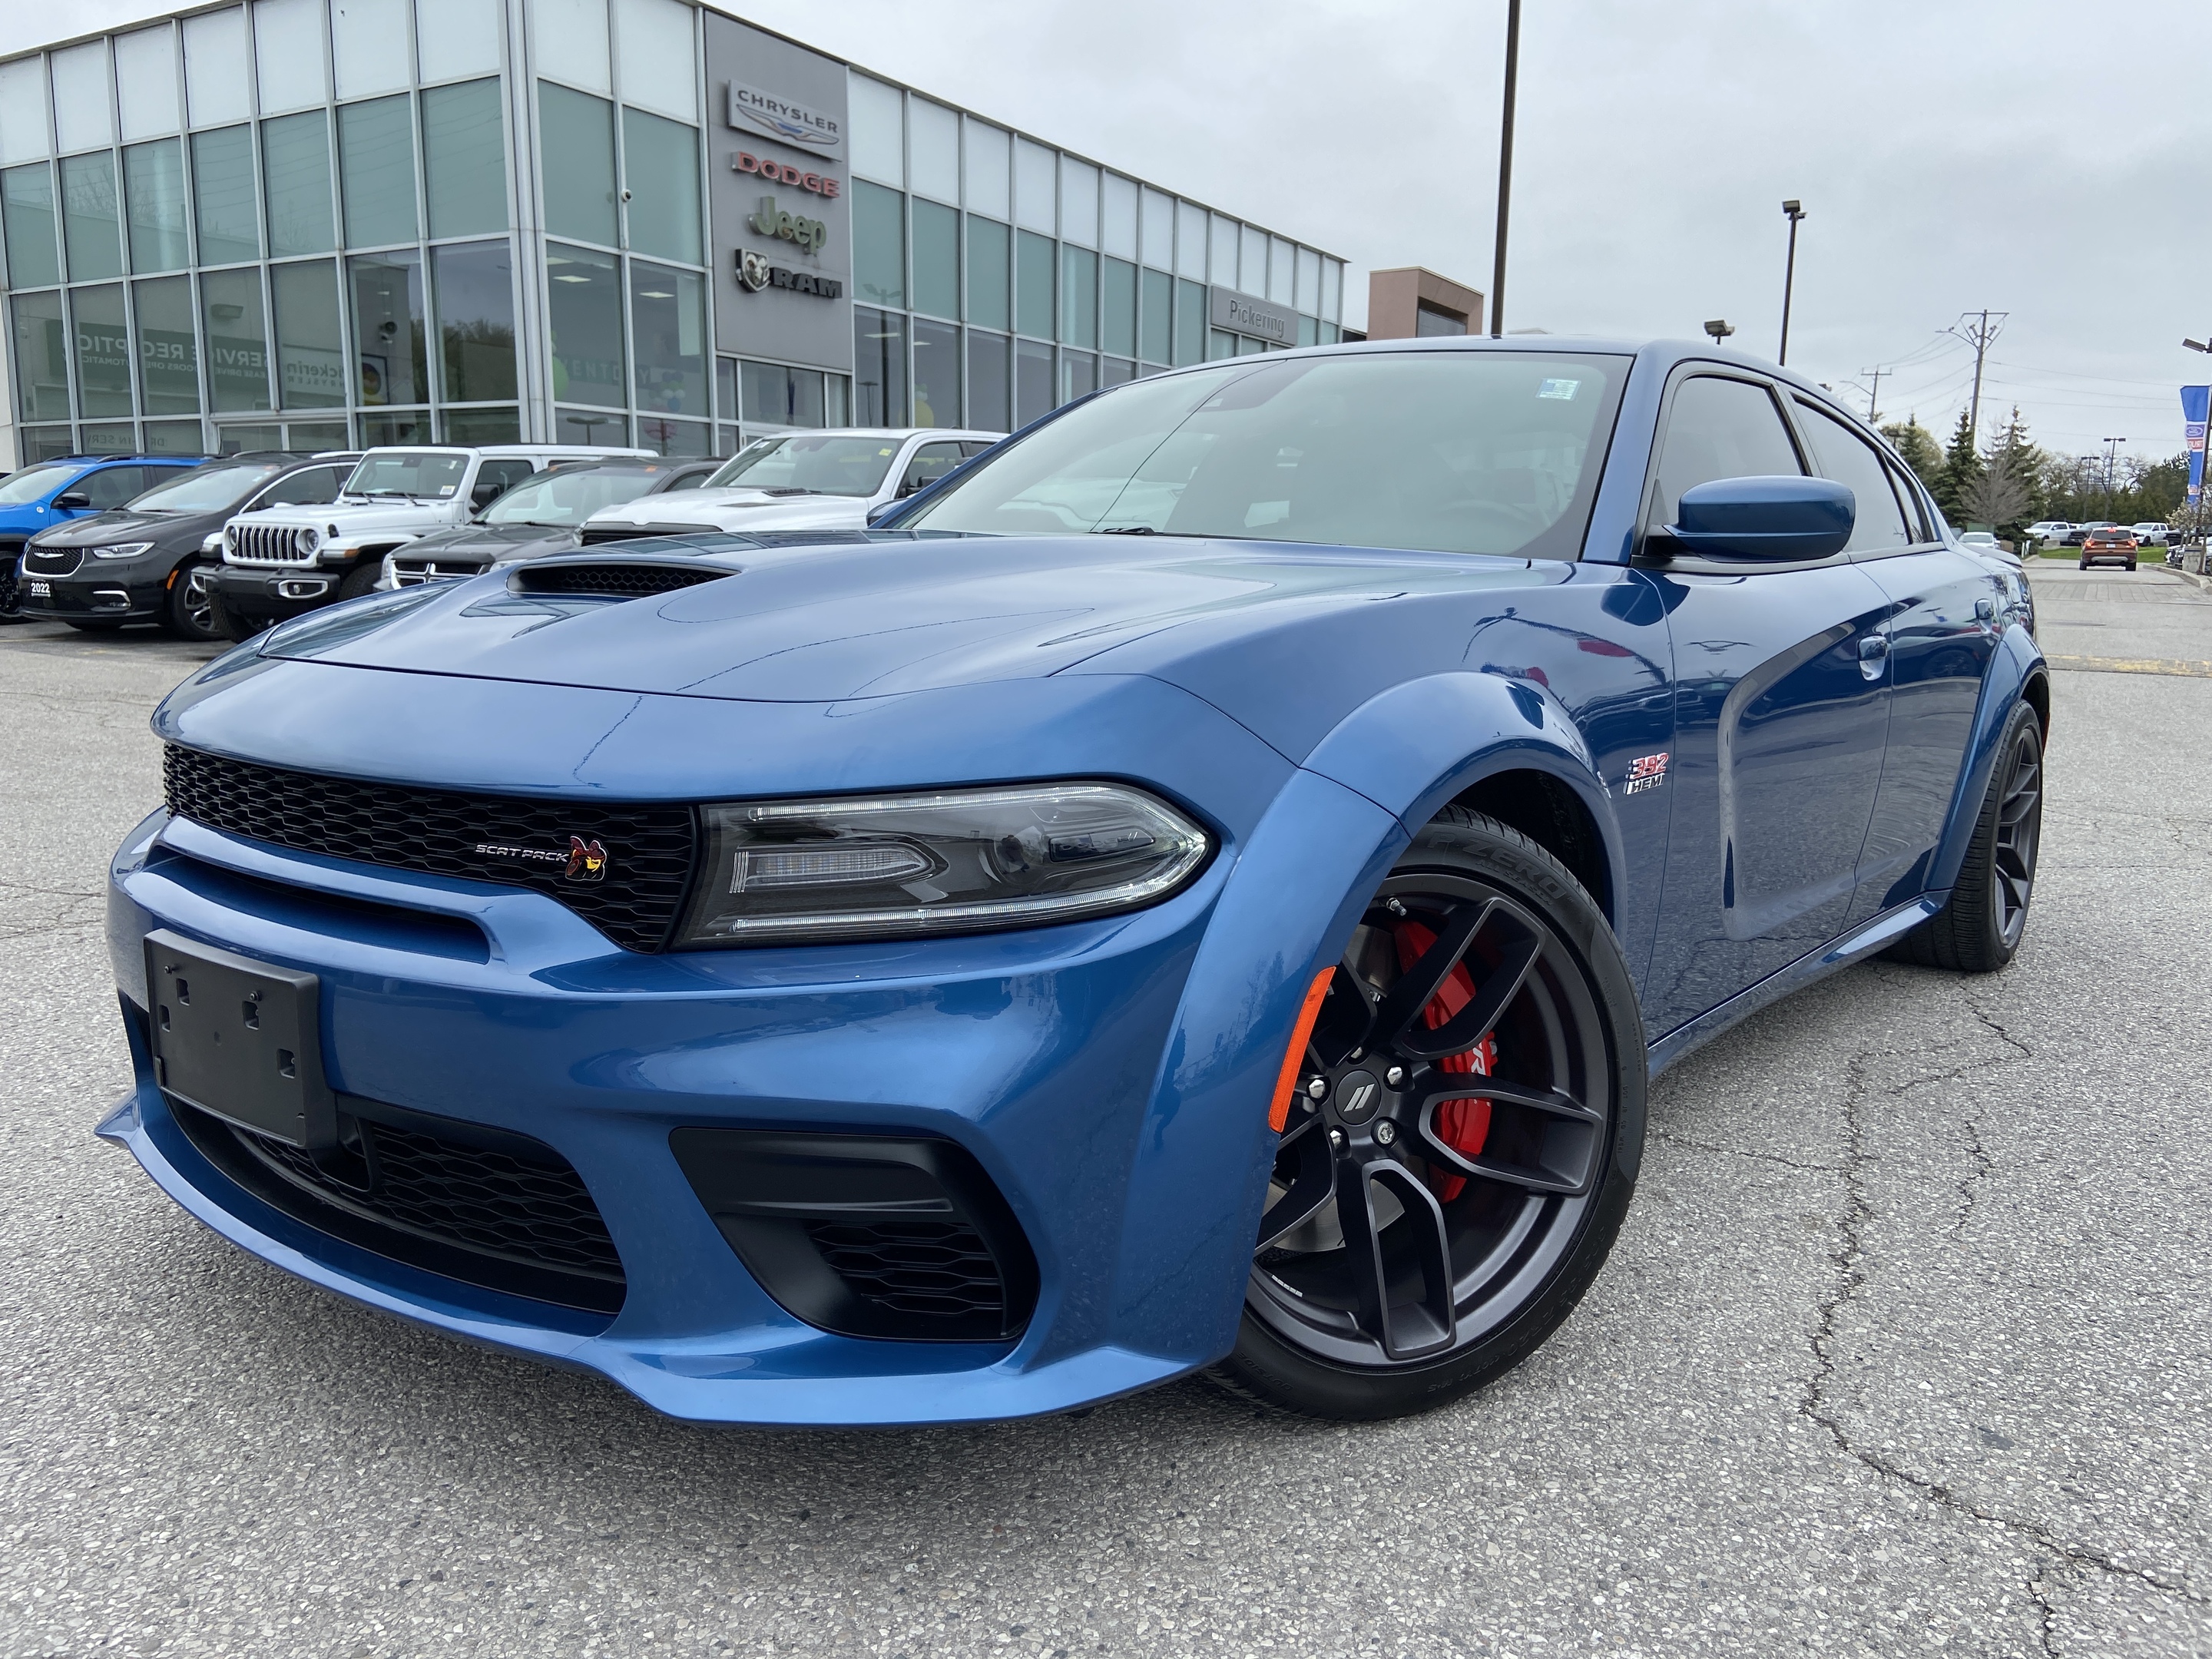 2021 Dodge Charger R/T Scat Pack 392 Widebody